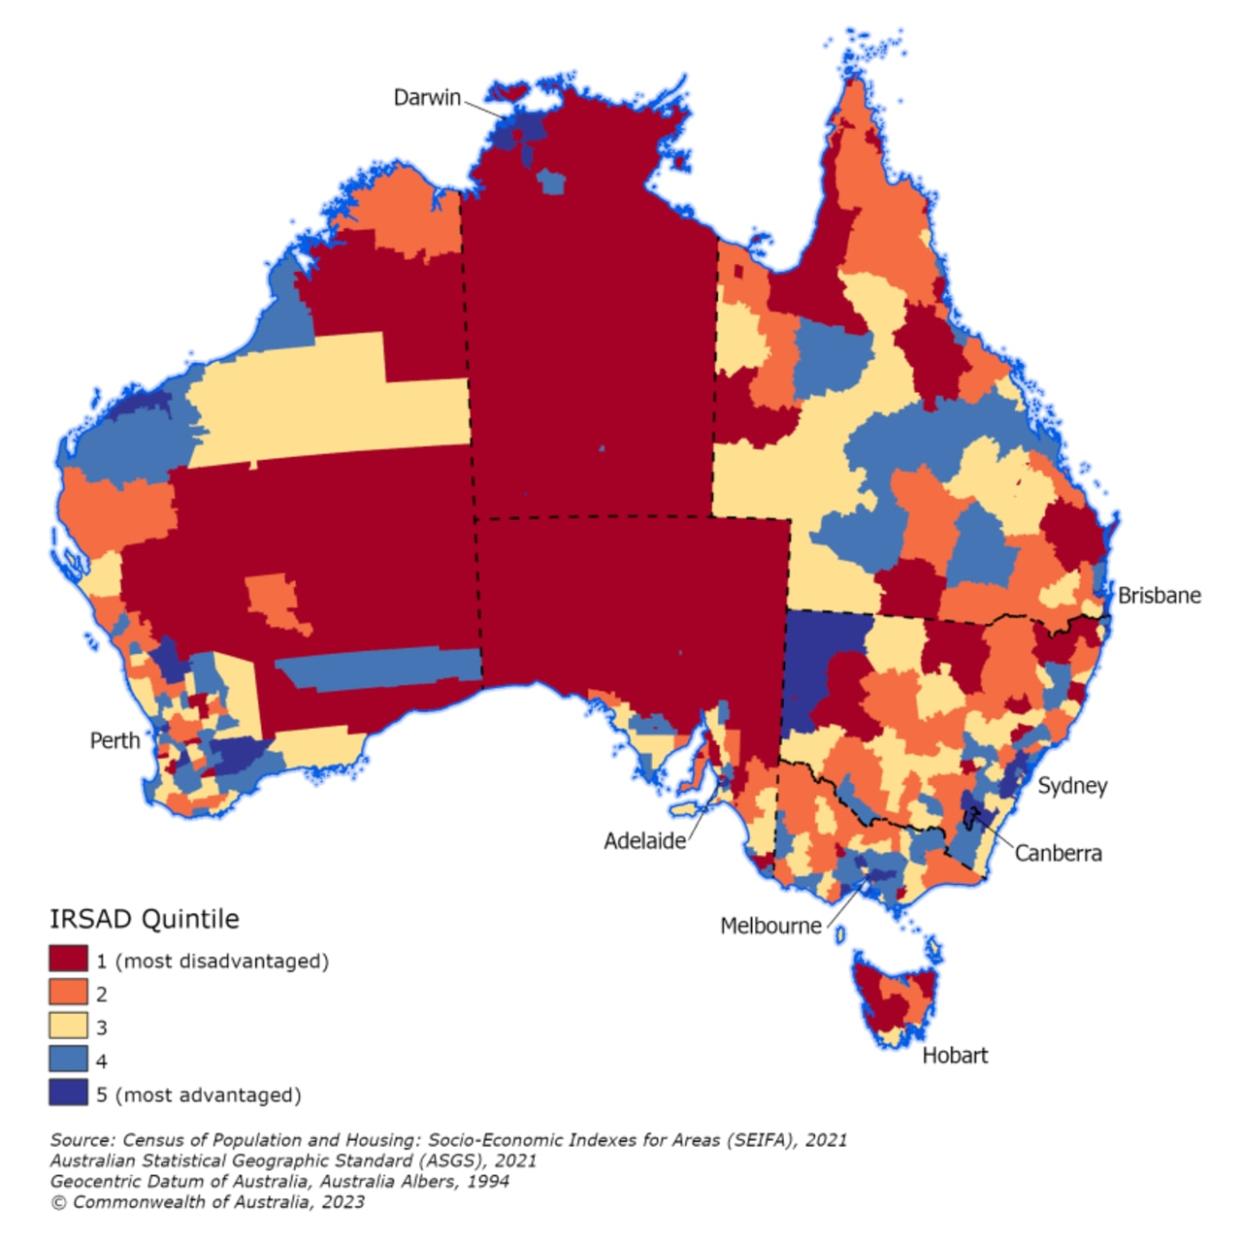 Australia's most advantaged local government areas are in Sydney, Perth and Darwin - while rural and regional Queensland and the NT are the most disadvantaged.